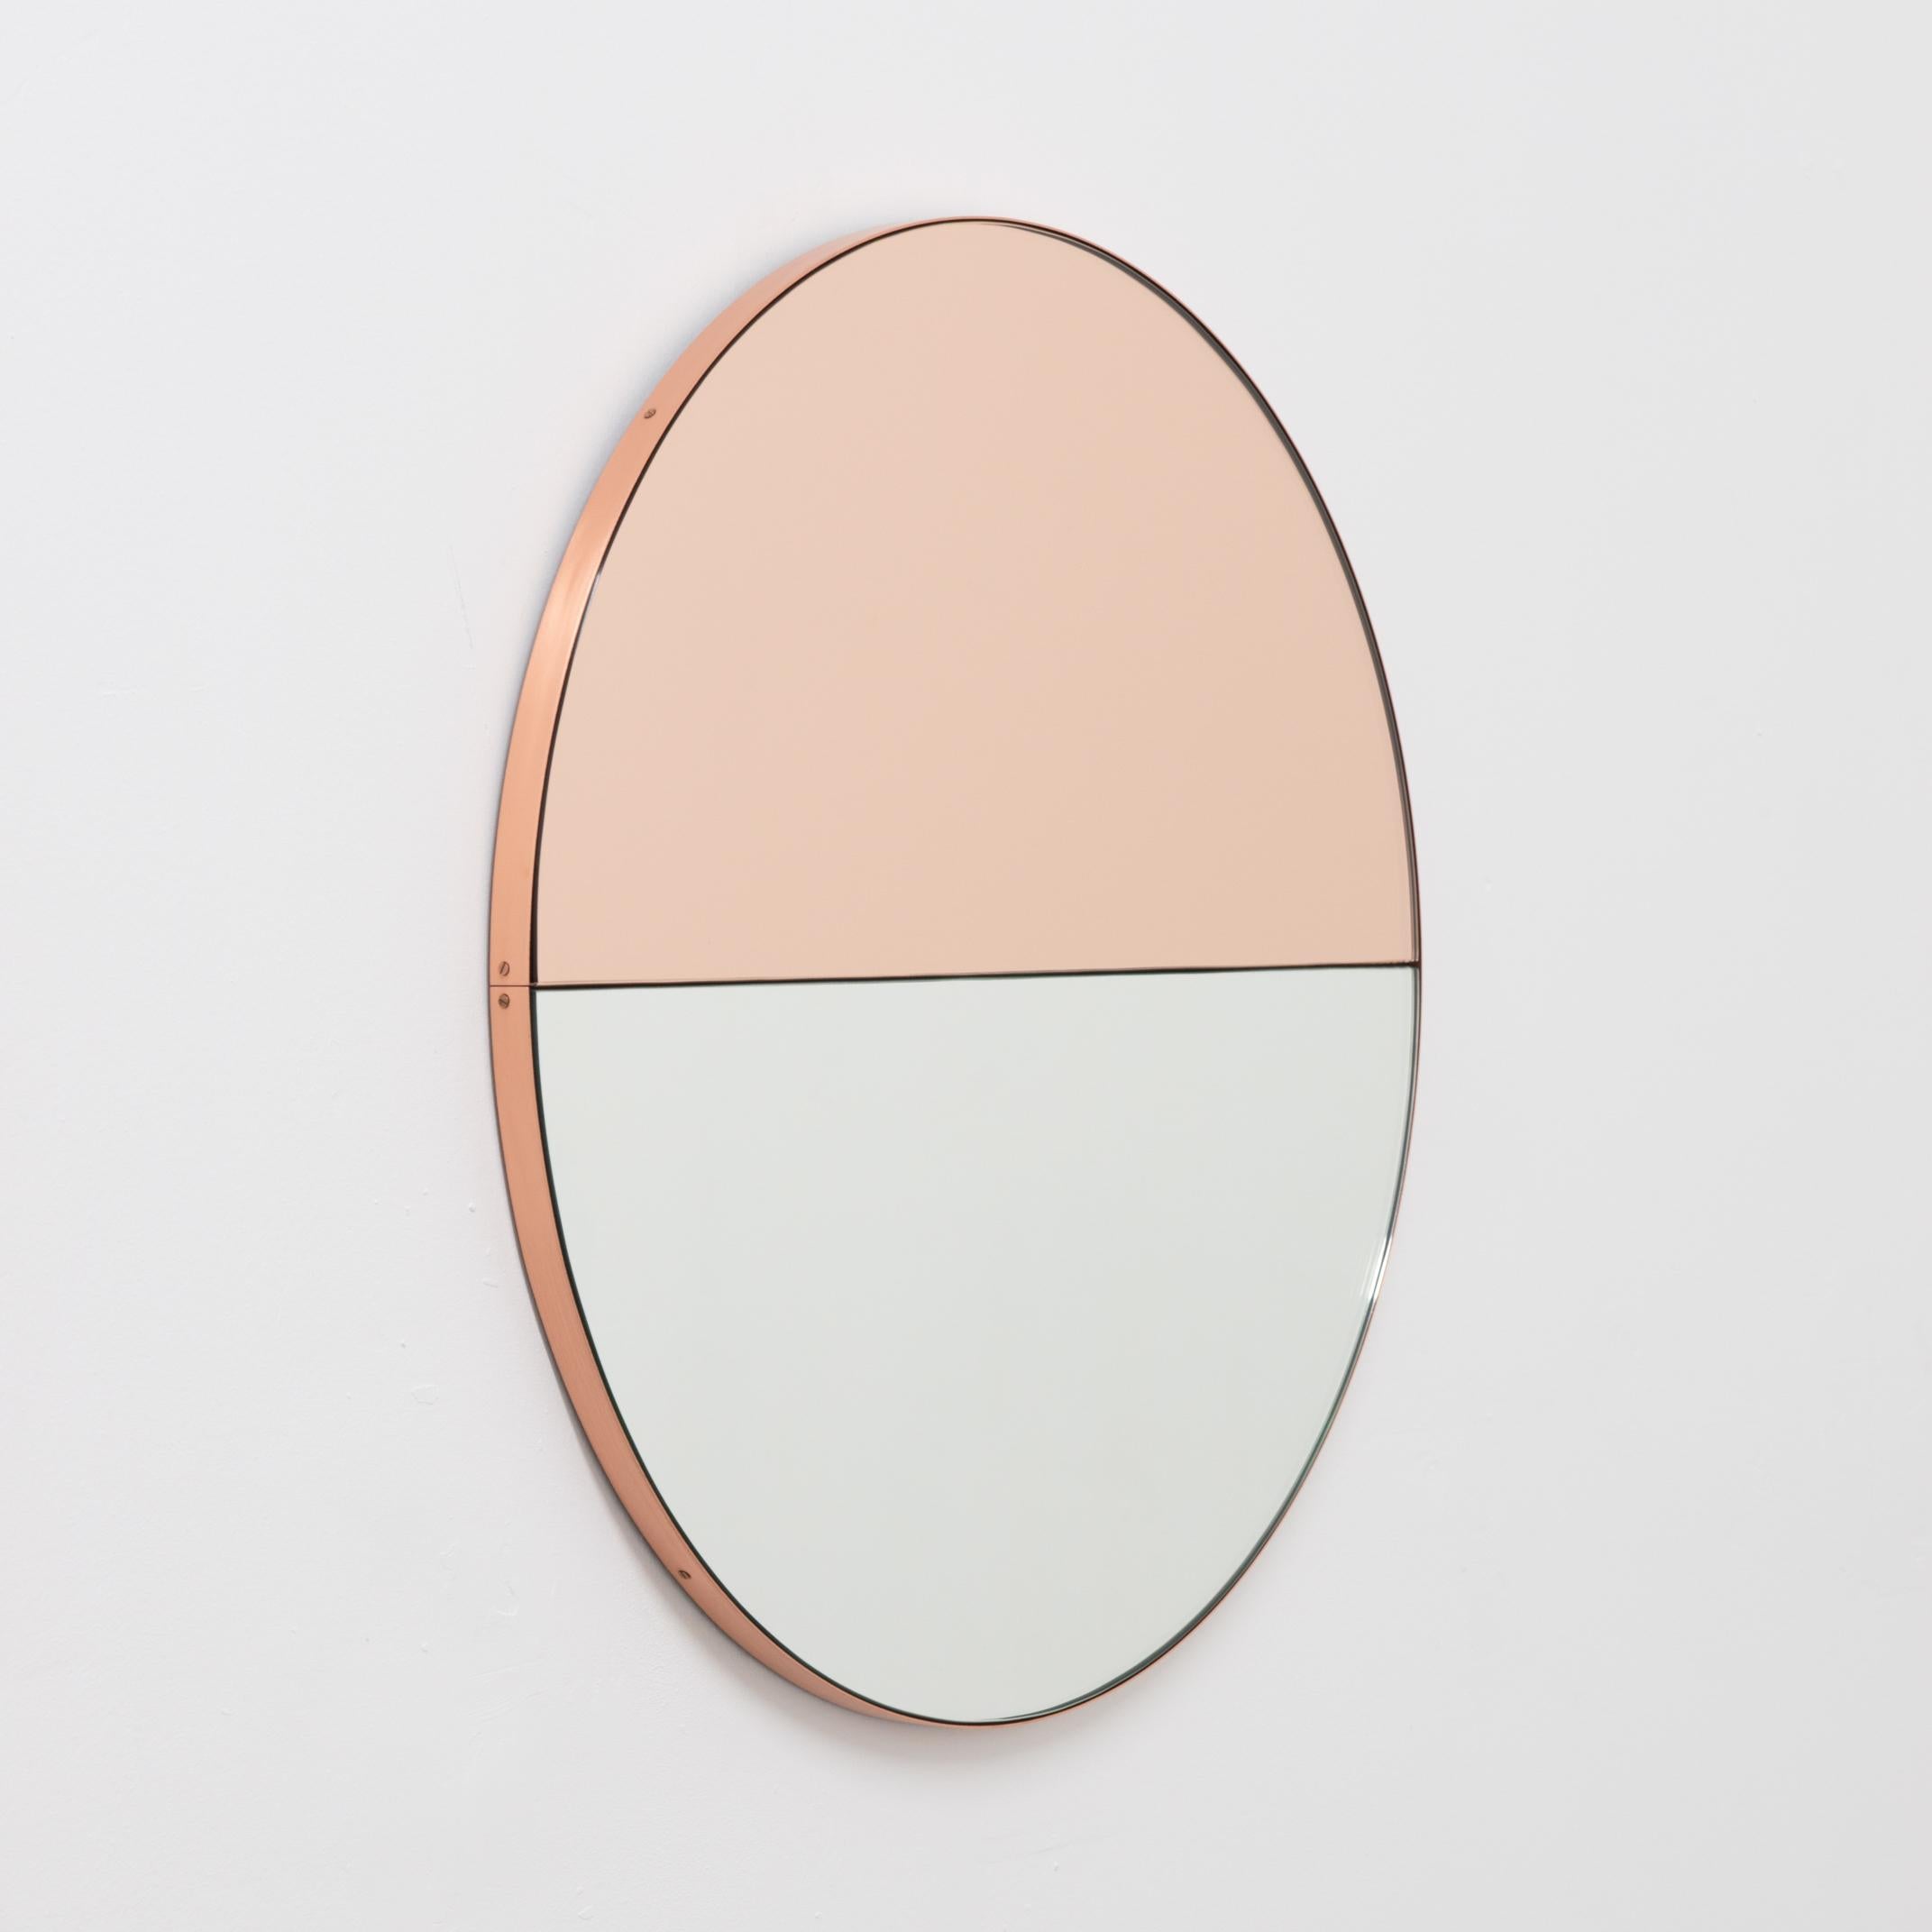 In Stock Orbis Dualis Peach Silver Round Mirror with Copper Frame, Medium In New Condition For Sale In London, GB